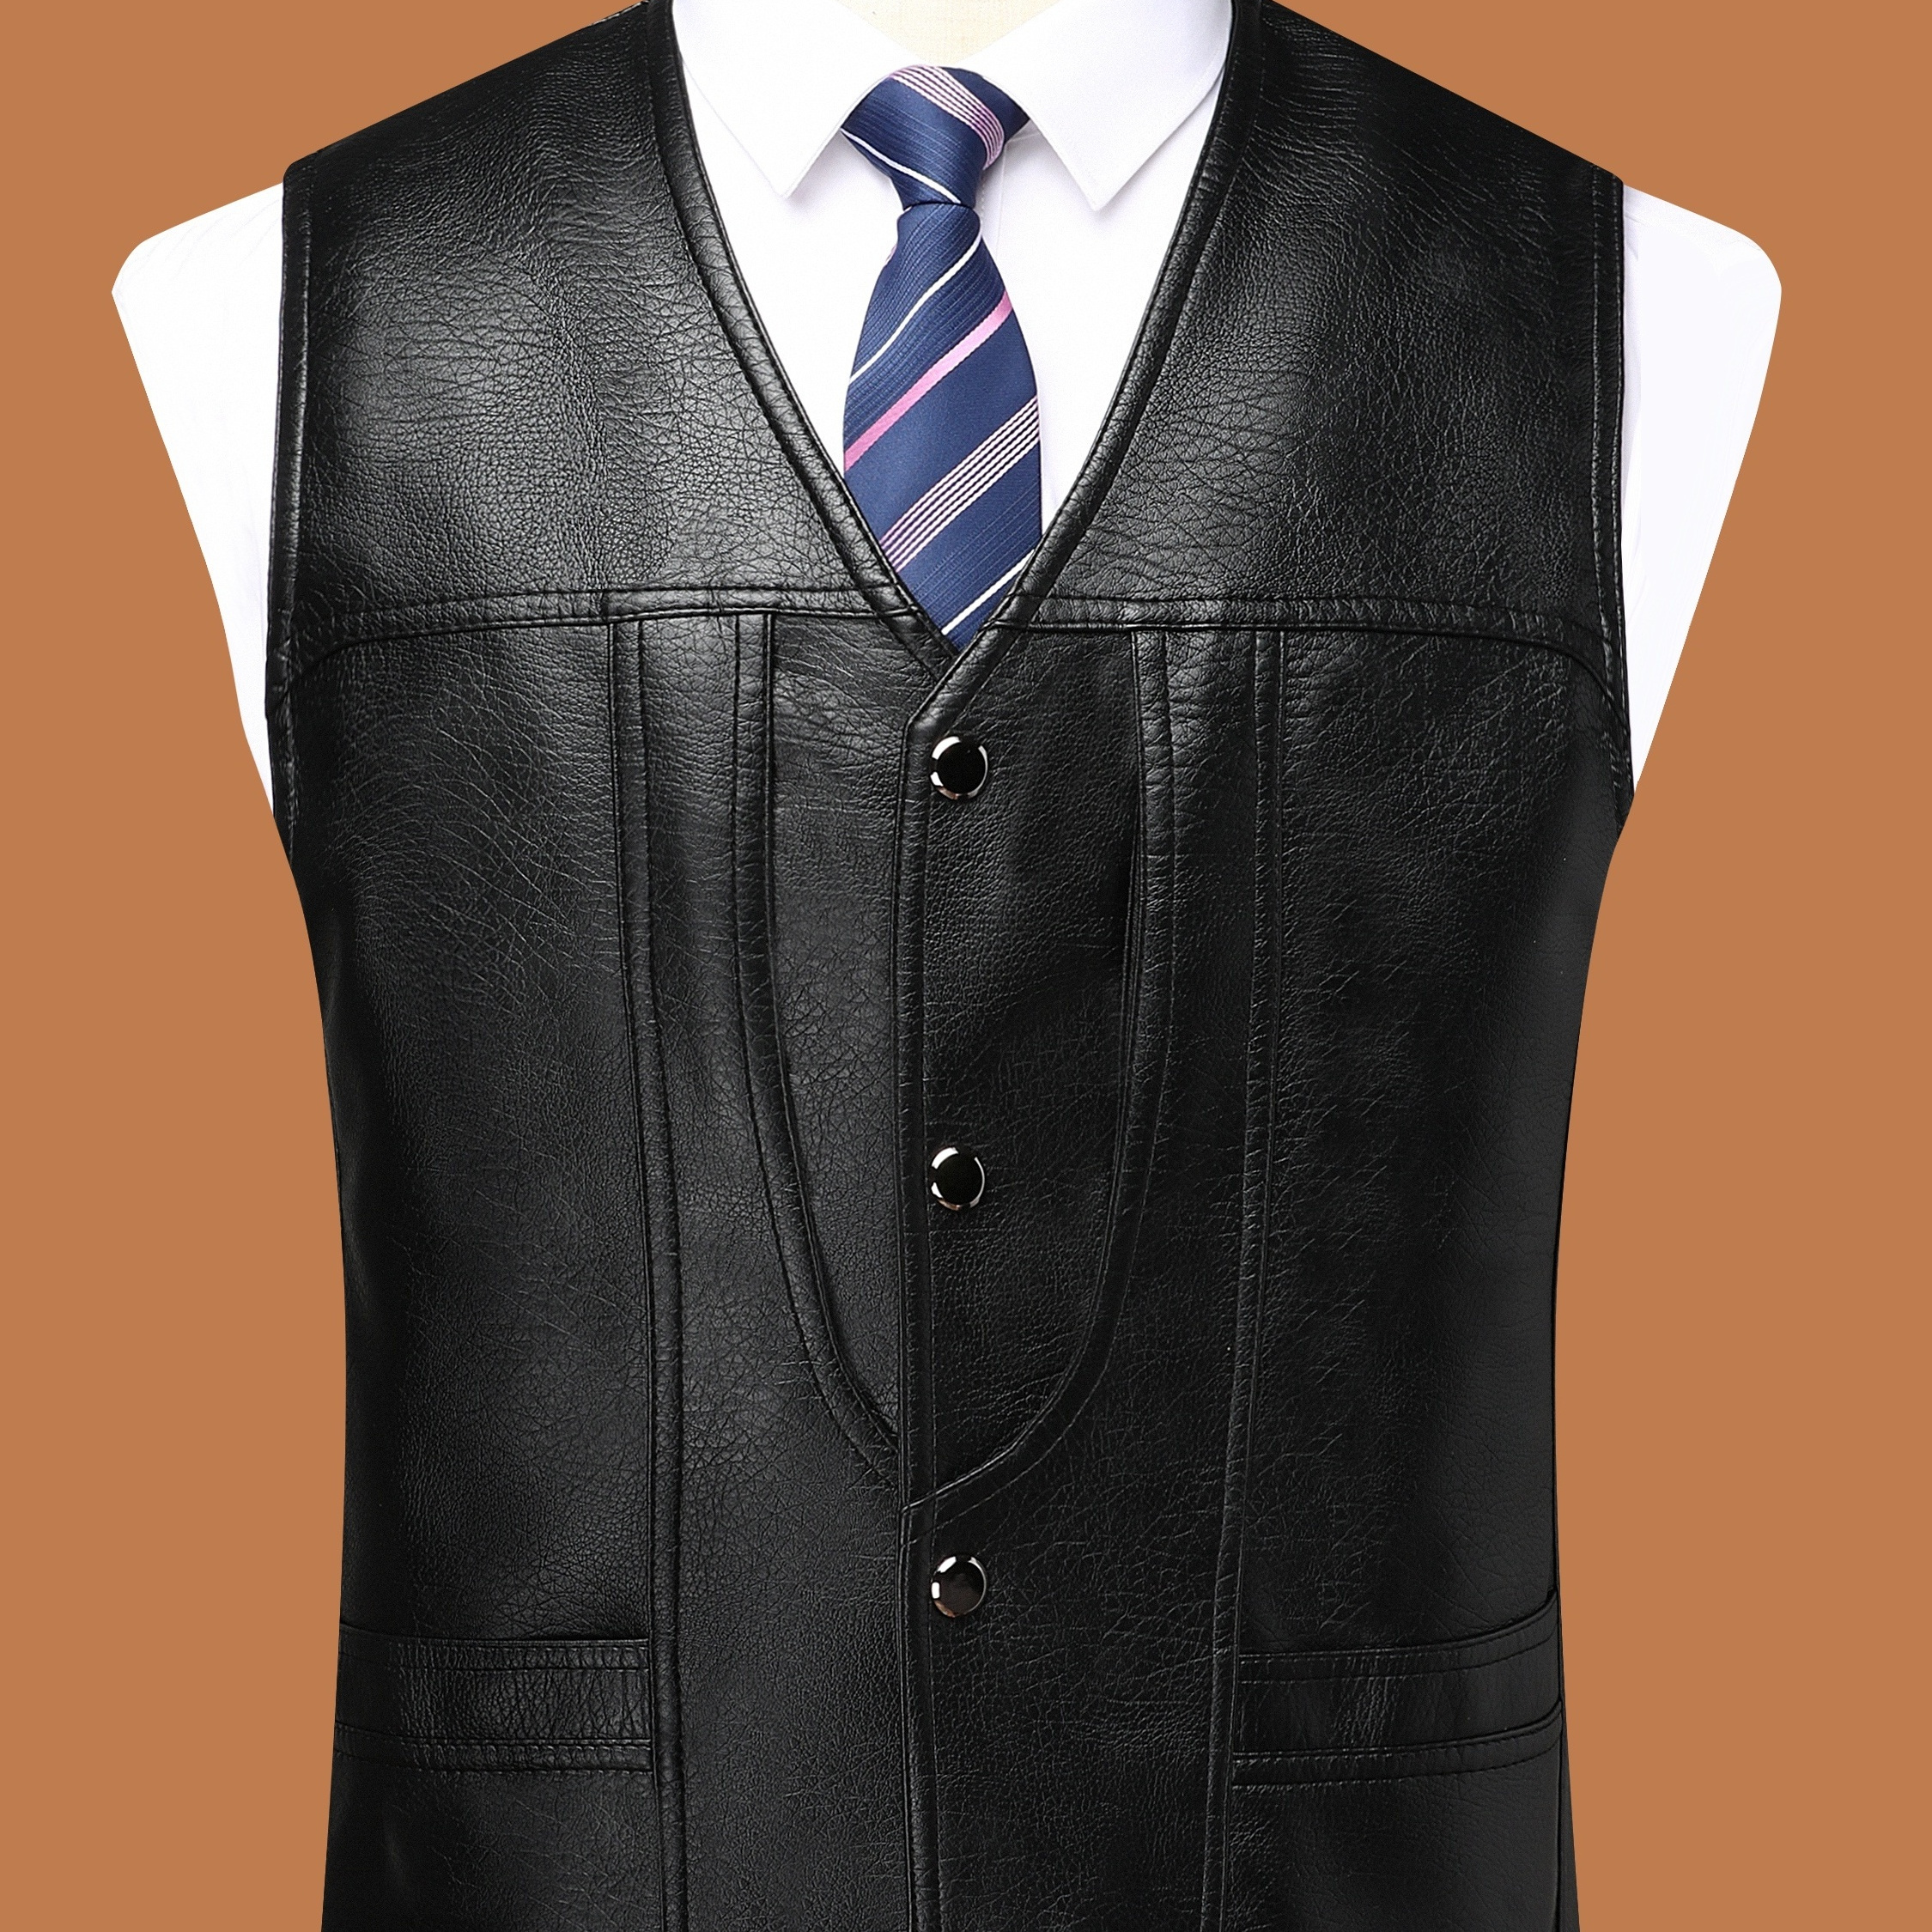 

V Neck Smart Pu Vest, Men's Casual Chic Solid Color Single Breasted Faux Leather Waistcoat For Spring Fall